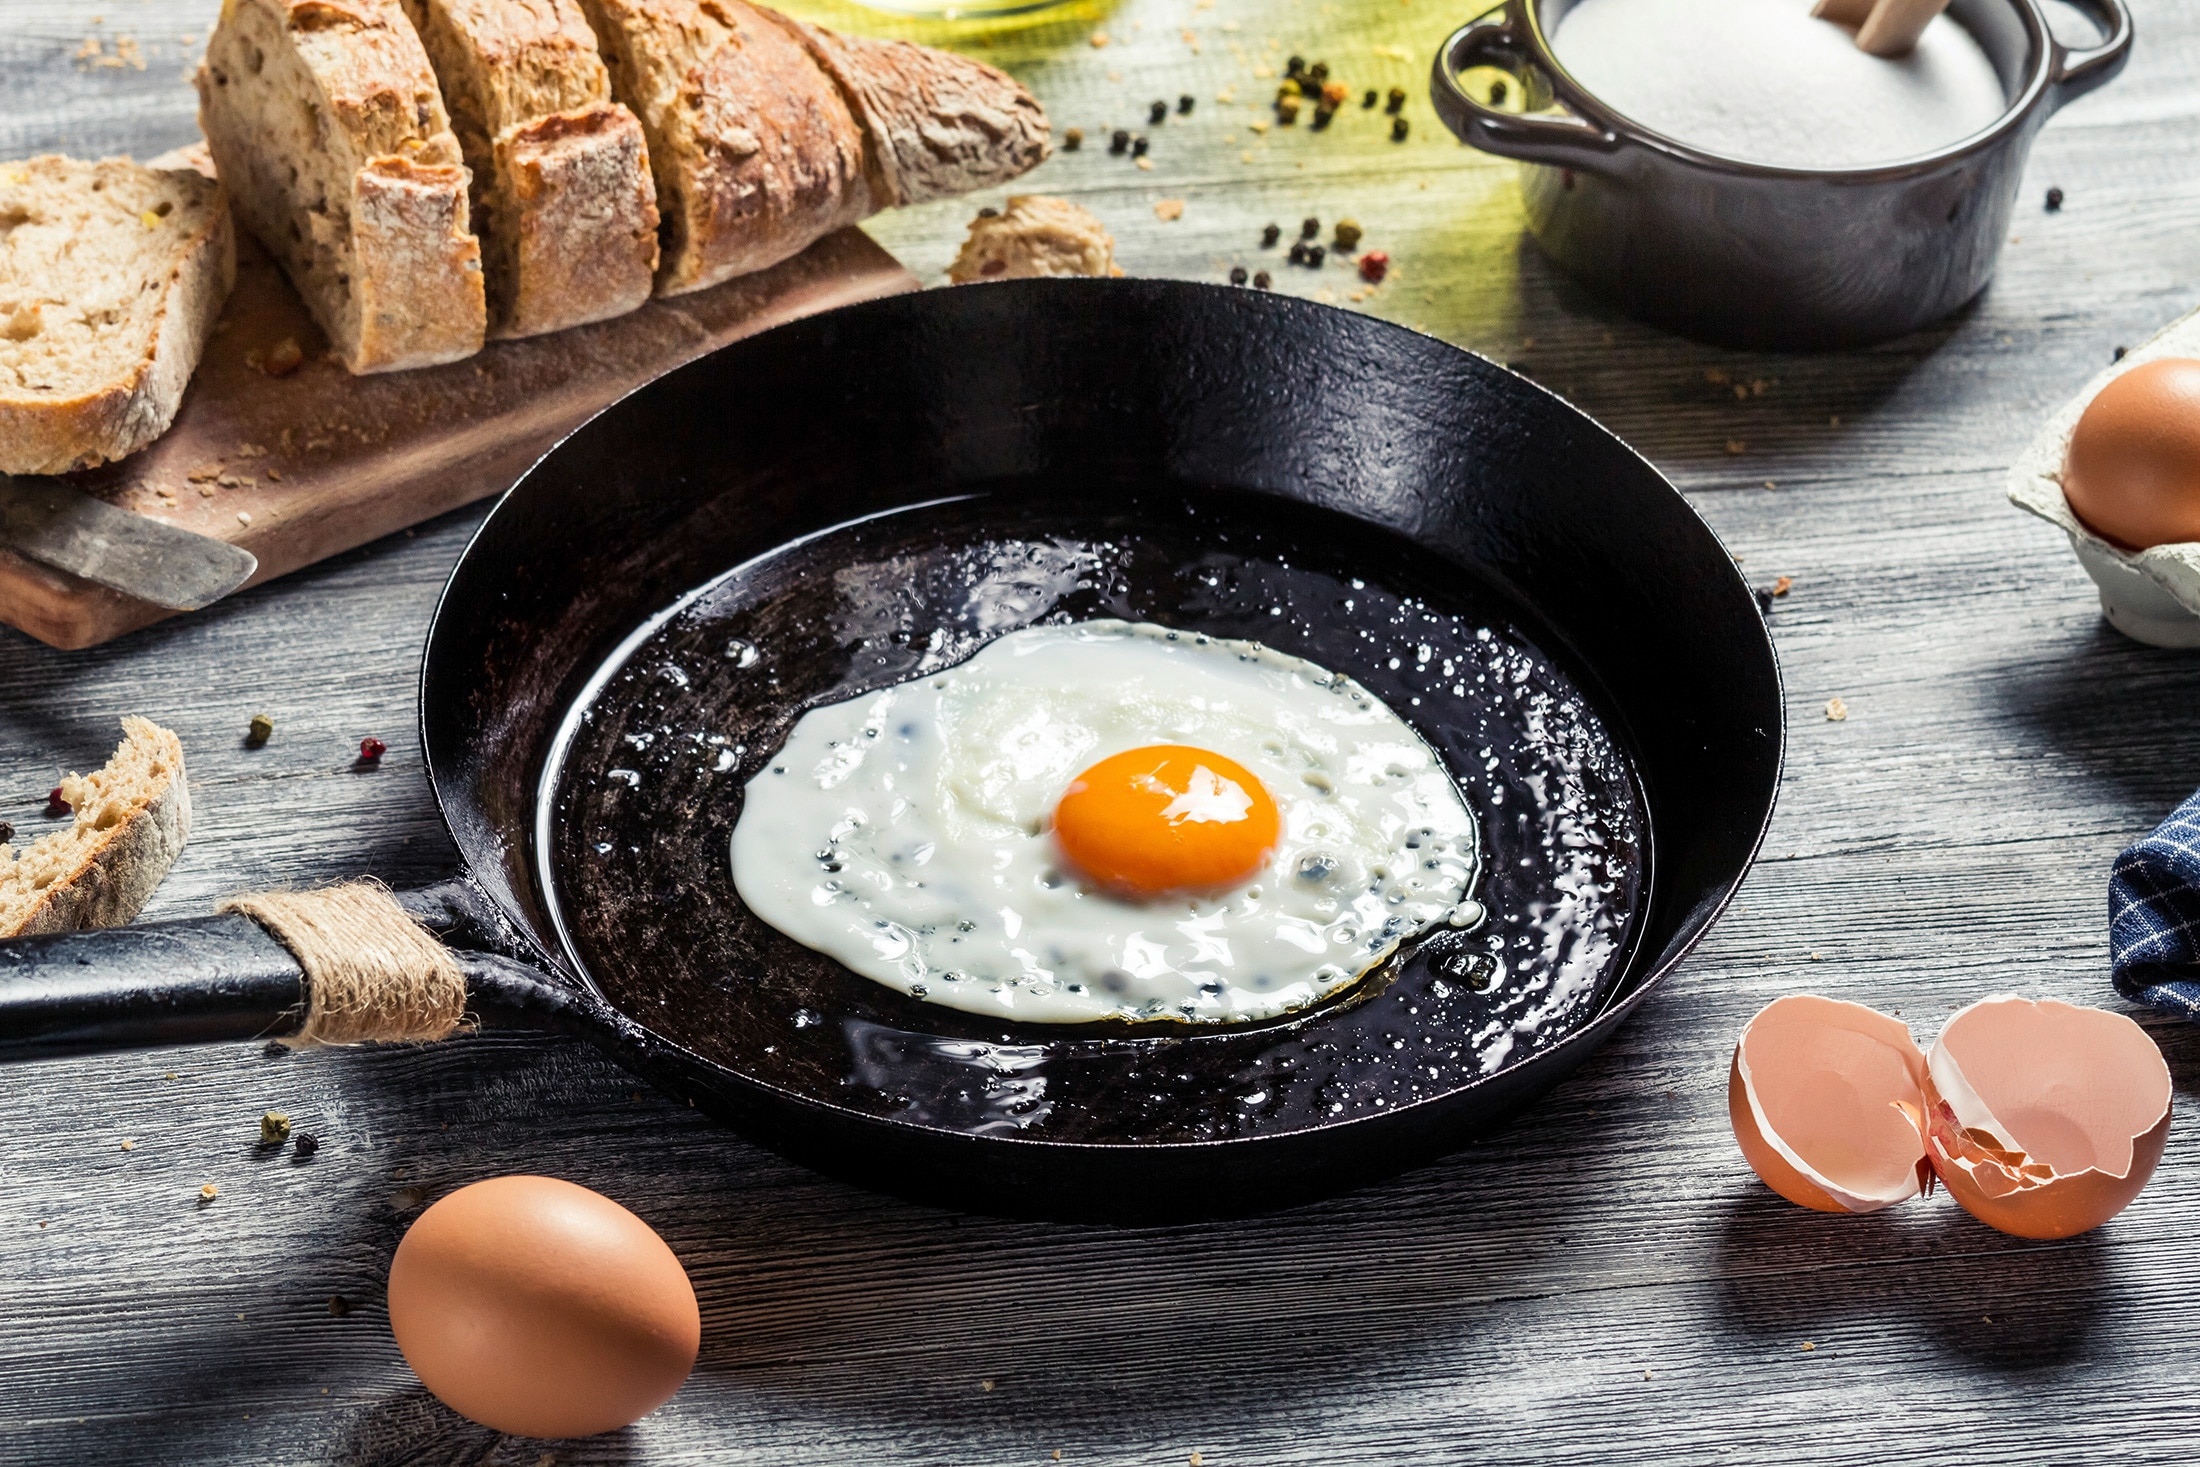 A skillet with a fried egg in oil